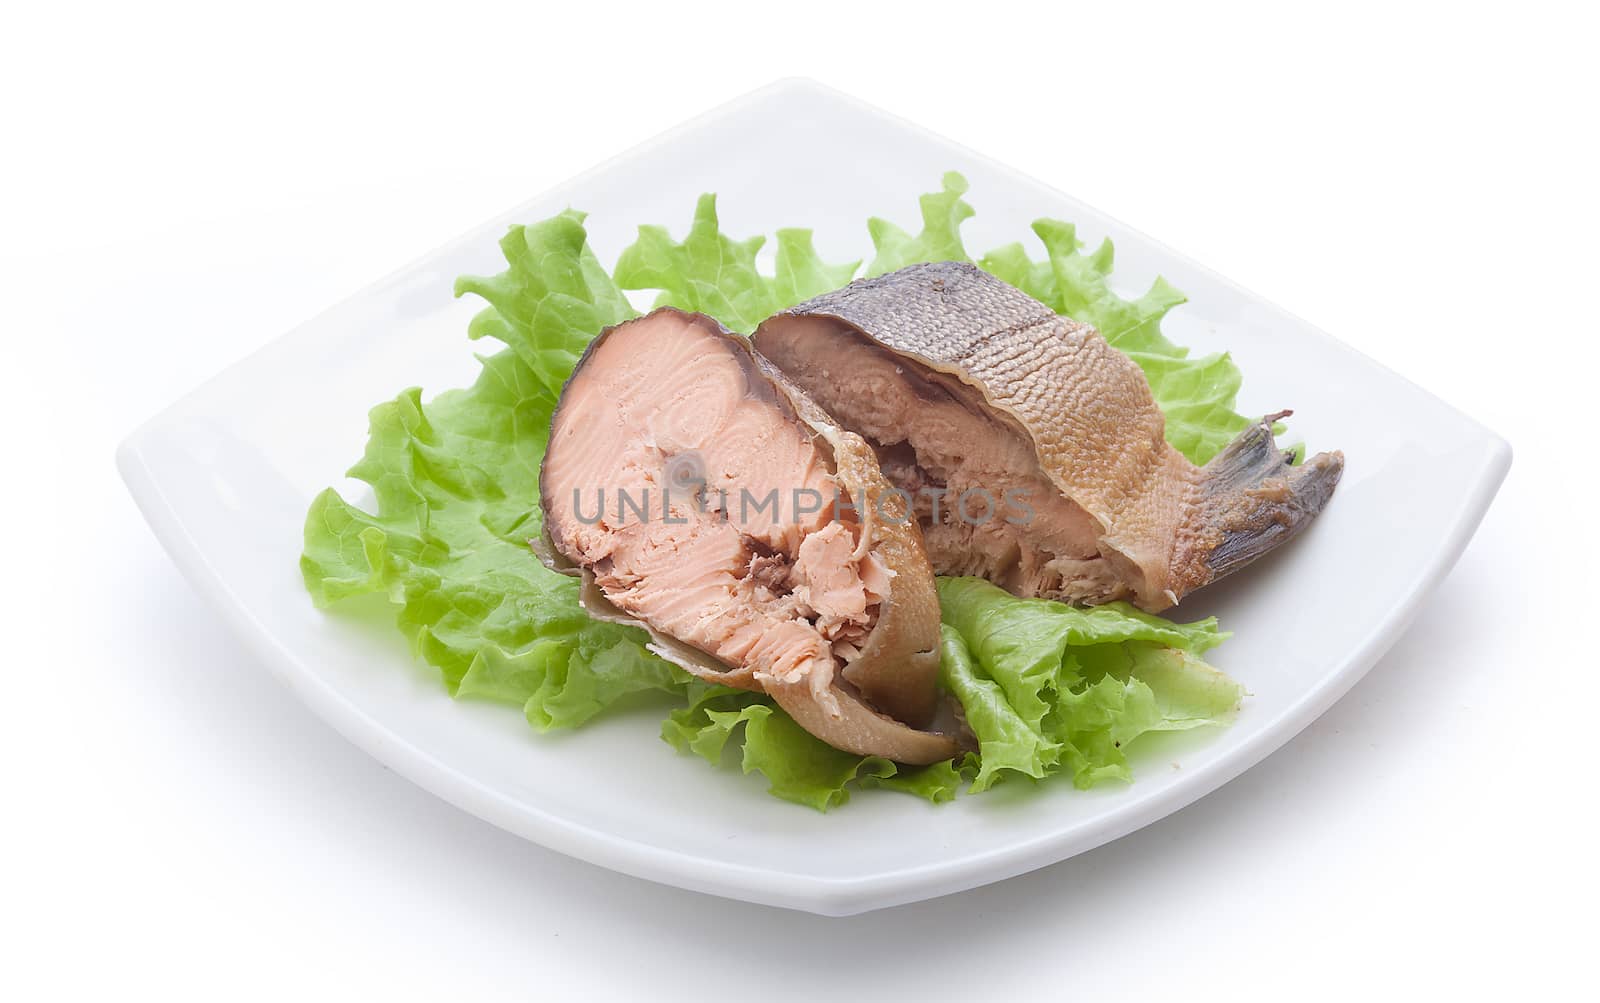 Pieces of smoked hunchback salmon with fresh green lettuce on the white plate